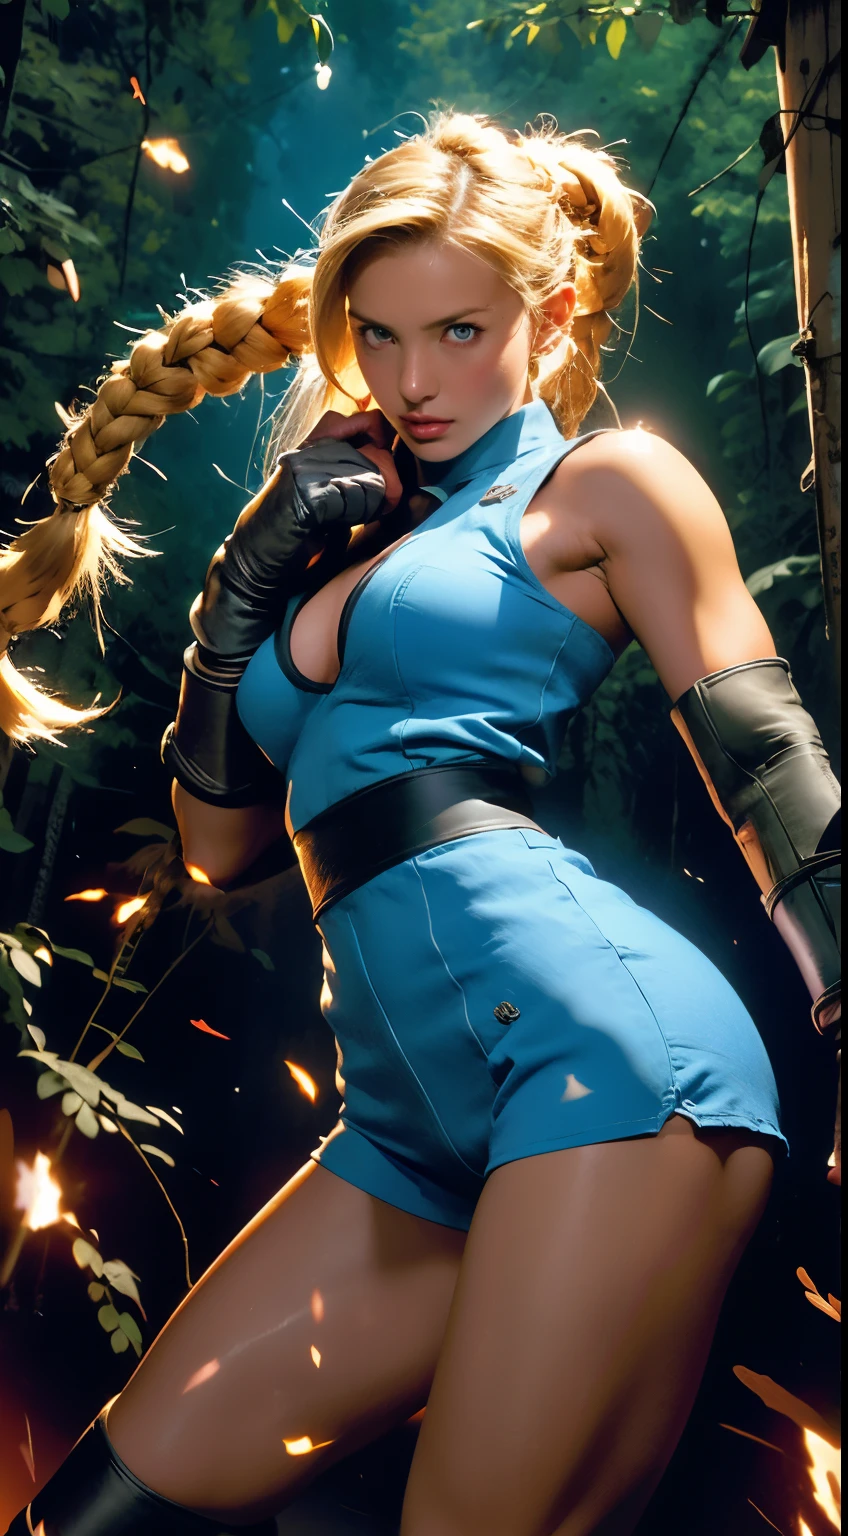 Best Quality, Masterpiece, Ultra High Resolution, rembrandt Lighting, night time, background dark, Enji Night as cammy street fighter, attractive, long blonde braided hair, sexy singlet vibrant blue outfit, wearing red combat gloves, combat boots, leggings, no cleavage, seductive, extra curves, wet skin, white skin, 3/4 shot of adynamic combat pose, big thighs, slim waist, shy, sfw, scantily clad, ripped, revealing outfit, camel toe, flawless masterpiece kawaii, perfect body, perfect face, perfect hands, perfect fingers, sexy pose, PERFECT ANATOMY, photorealistic, masterpiece, photorealistic, high resolution, soft light, medium breast, not nsfw.